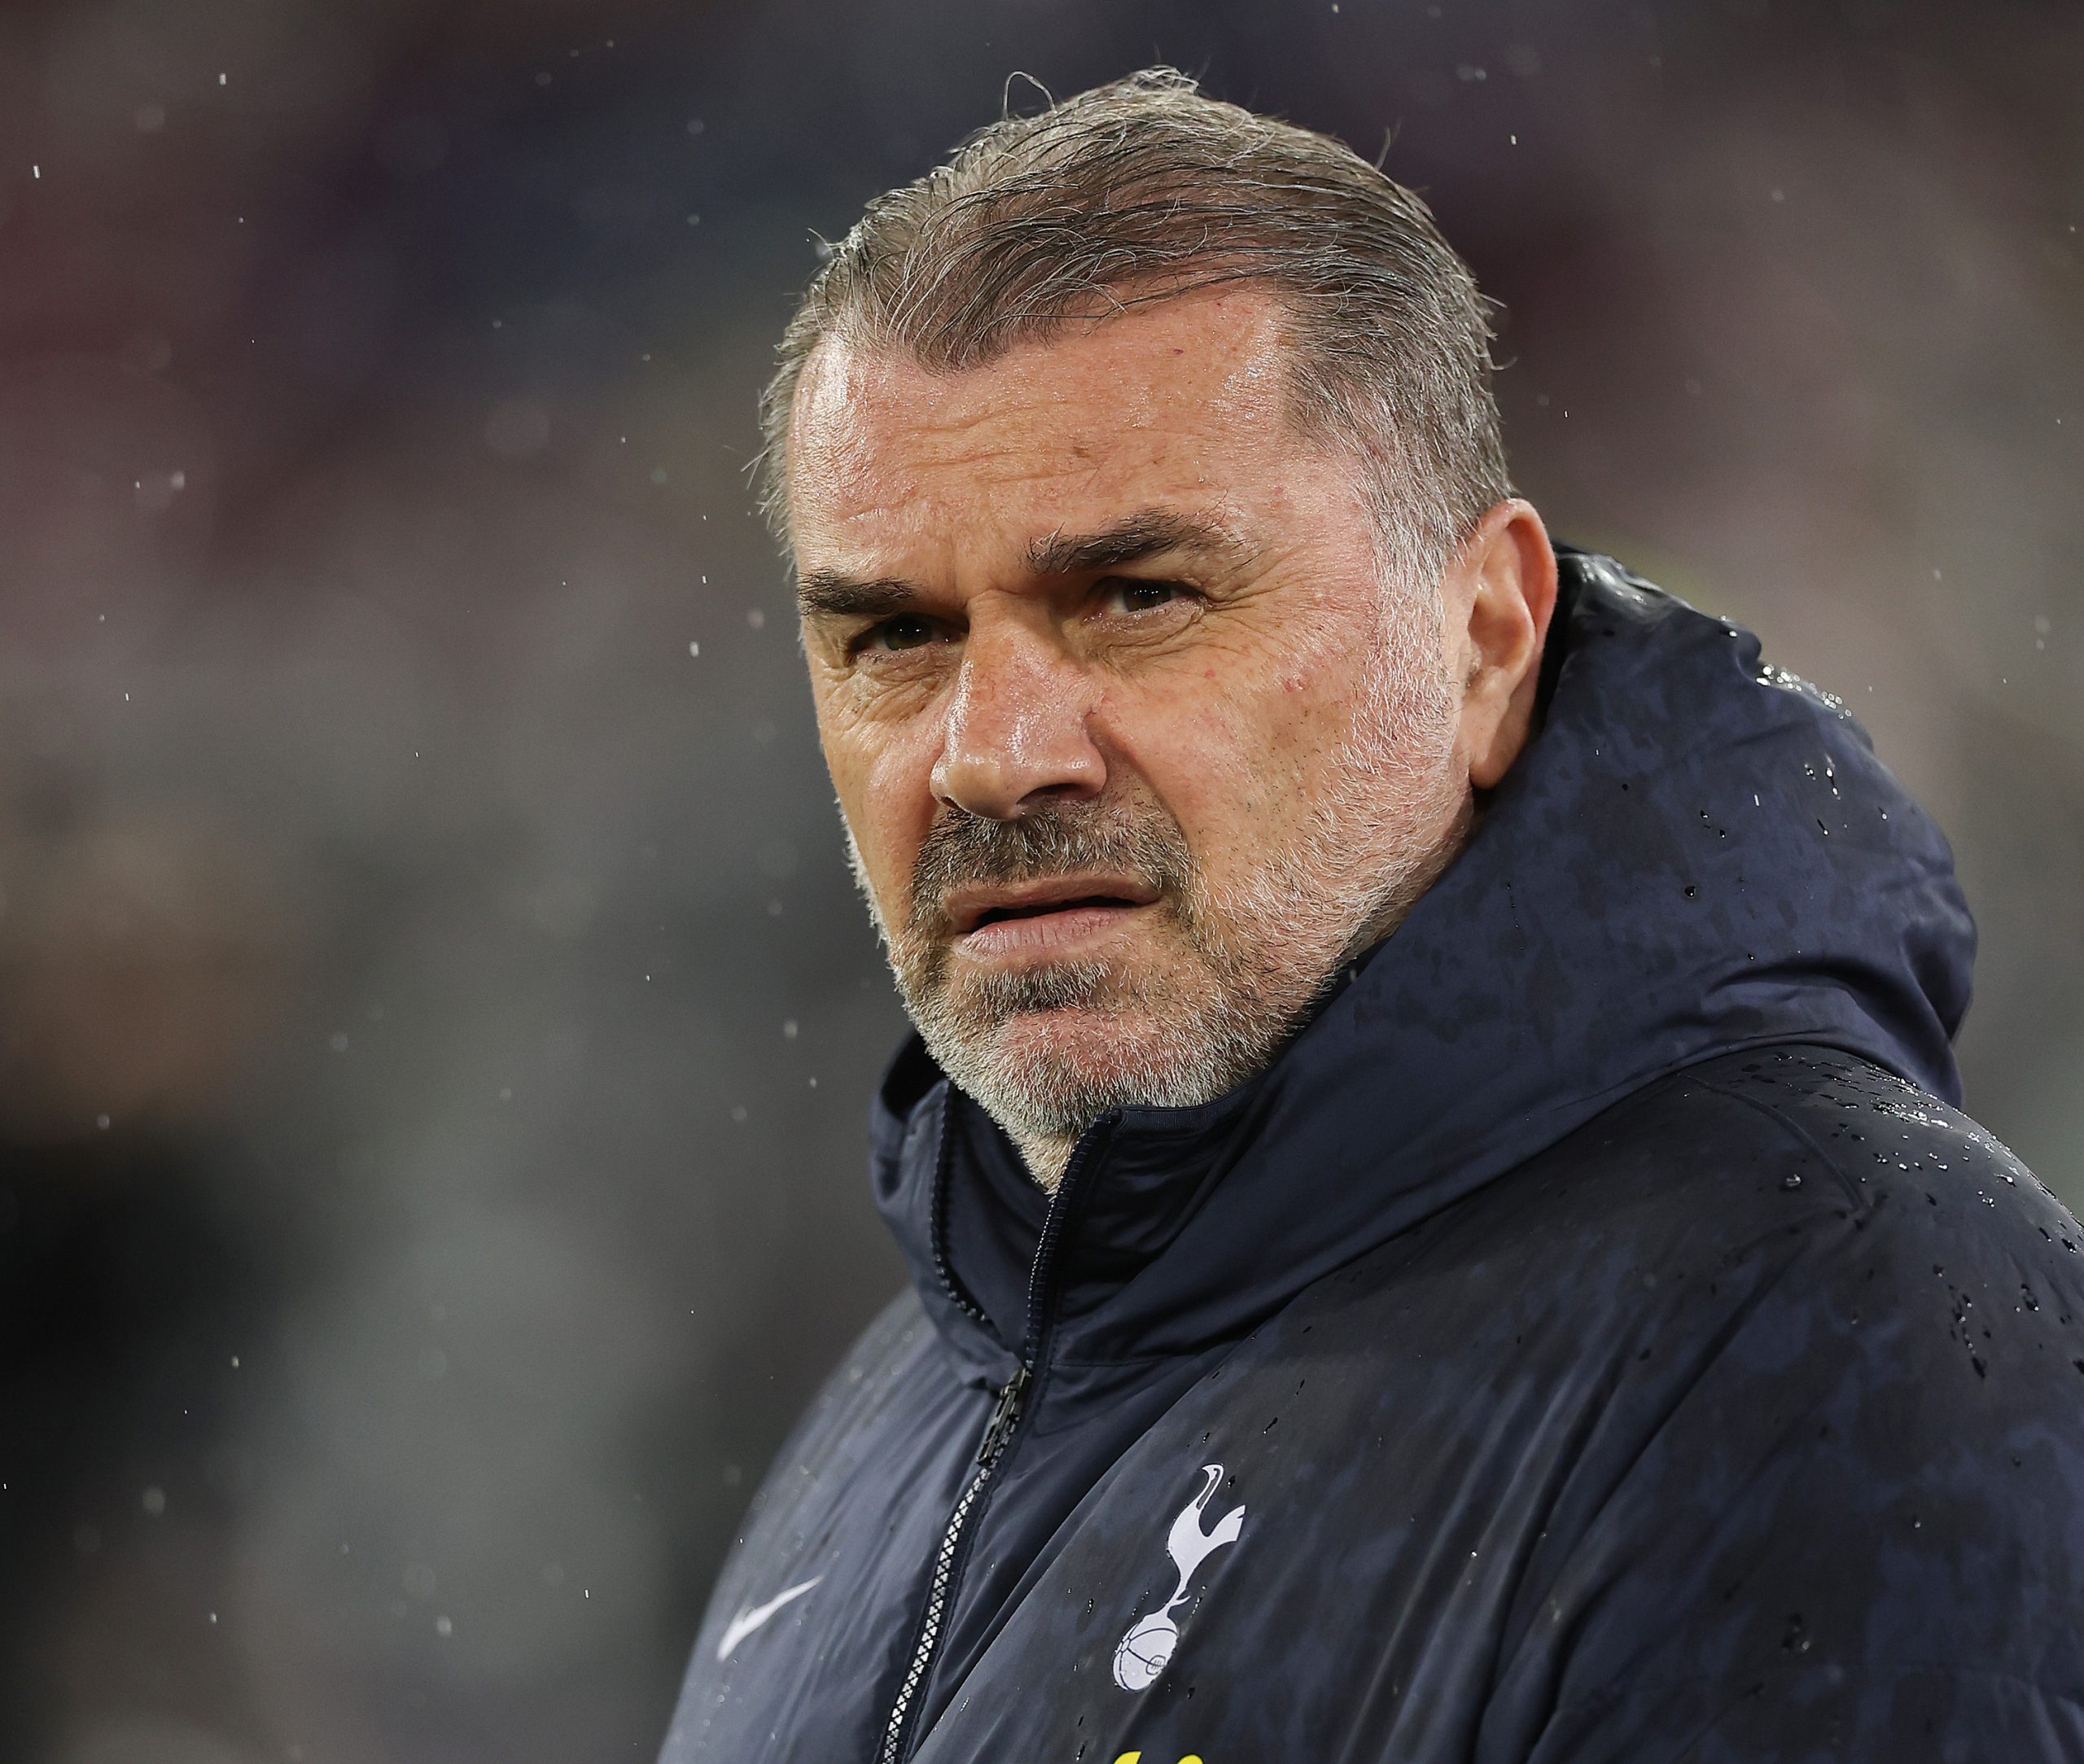 “My brother”, “My boy”- Ange Postecoglou signings form connection as Micky van de Ven shares the love with Tottenham teammate on social media